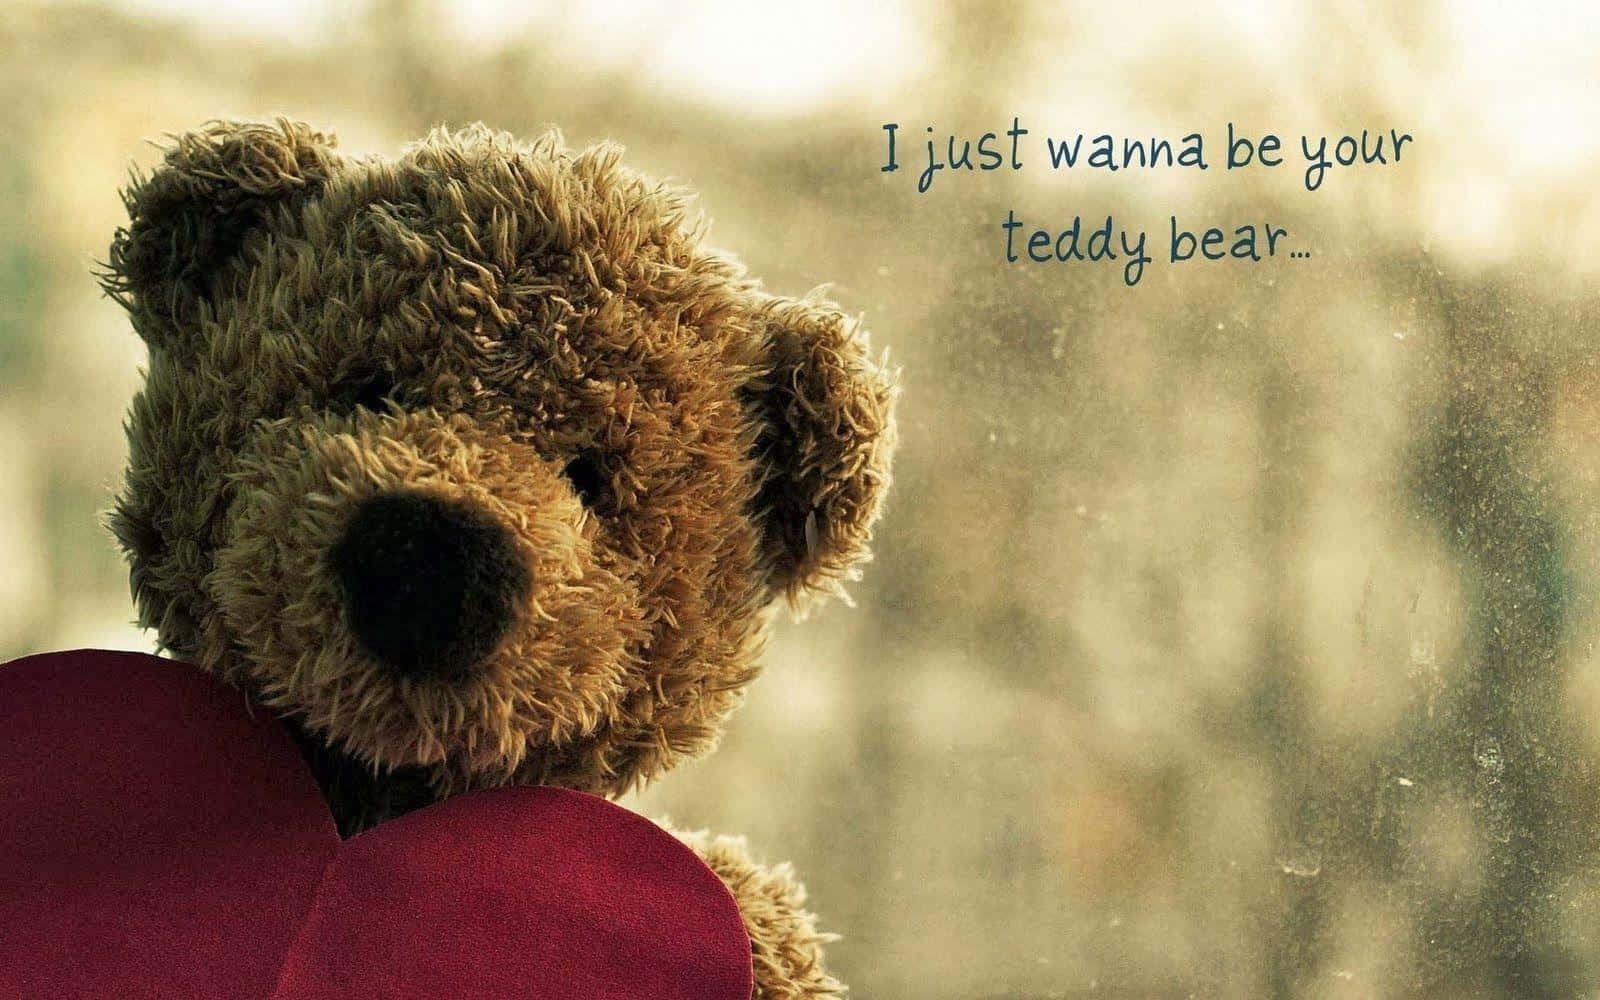 This cute teddy knows how to make you smile